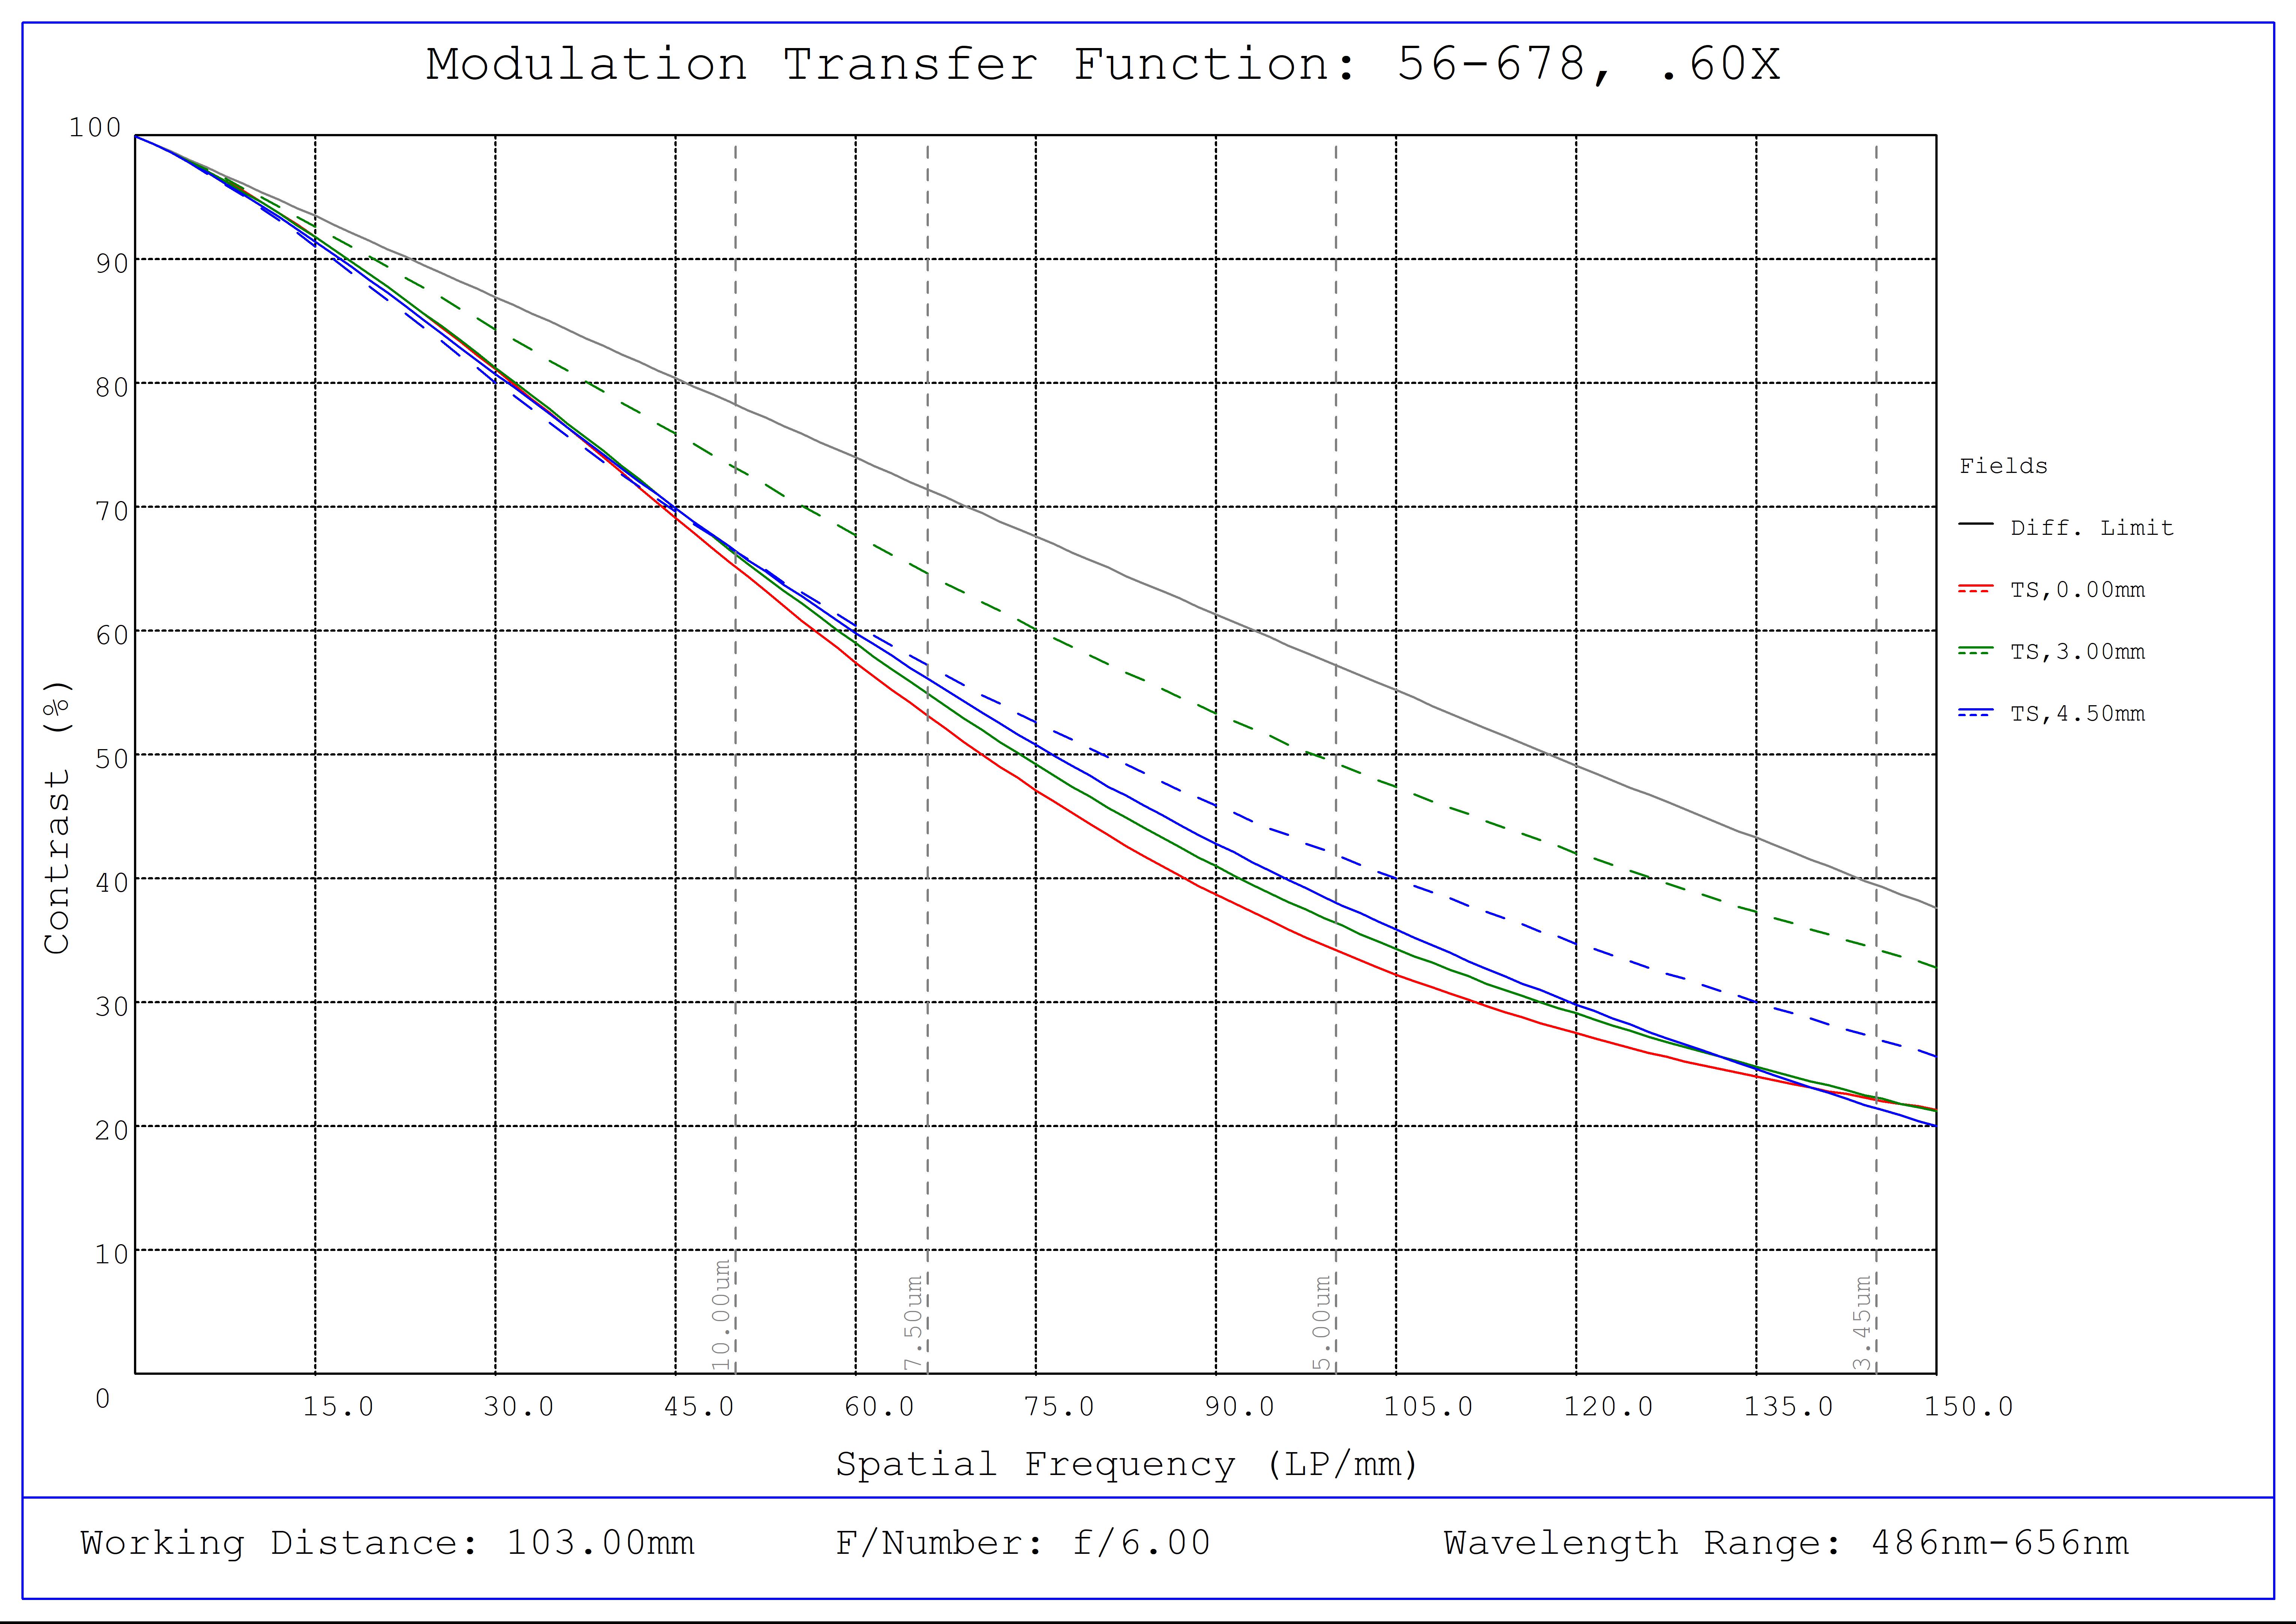 #56-678, 0.60X SilverTL™ Telecentric Lens, Modulated Transfer Function (MTF) Plot, 103mm Working Distance, f6